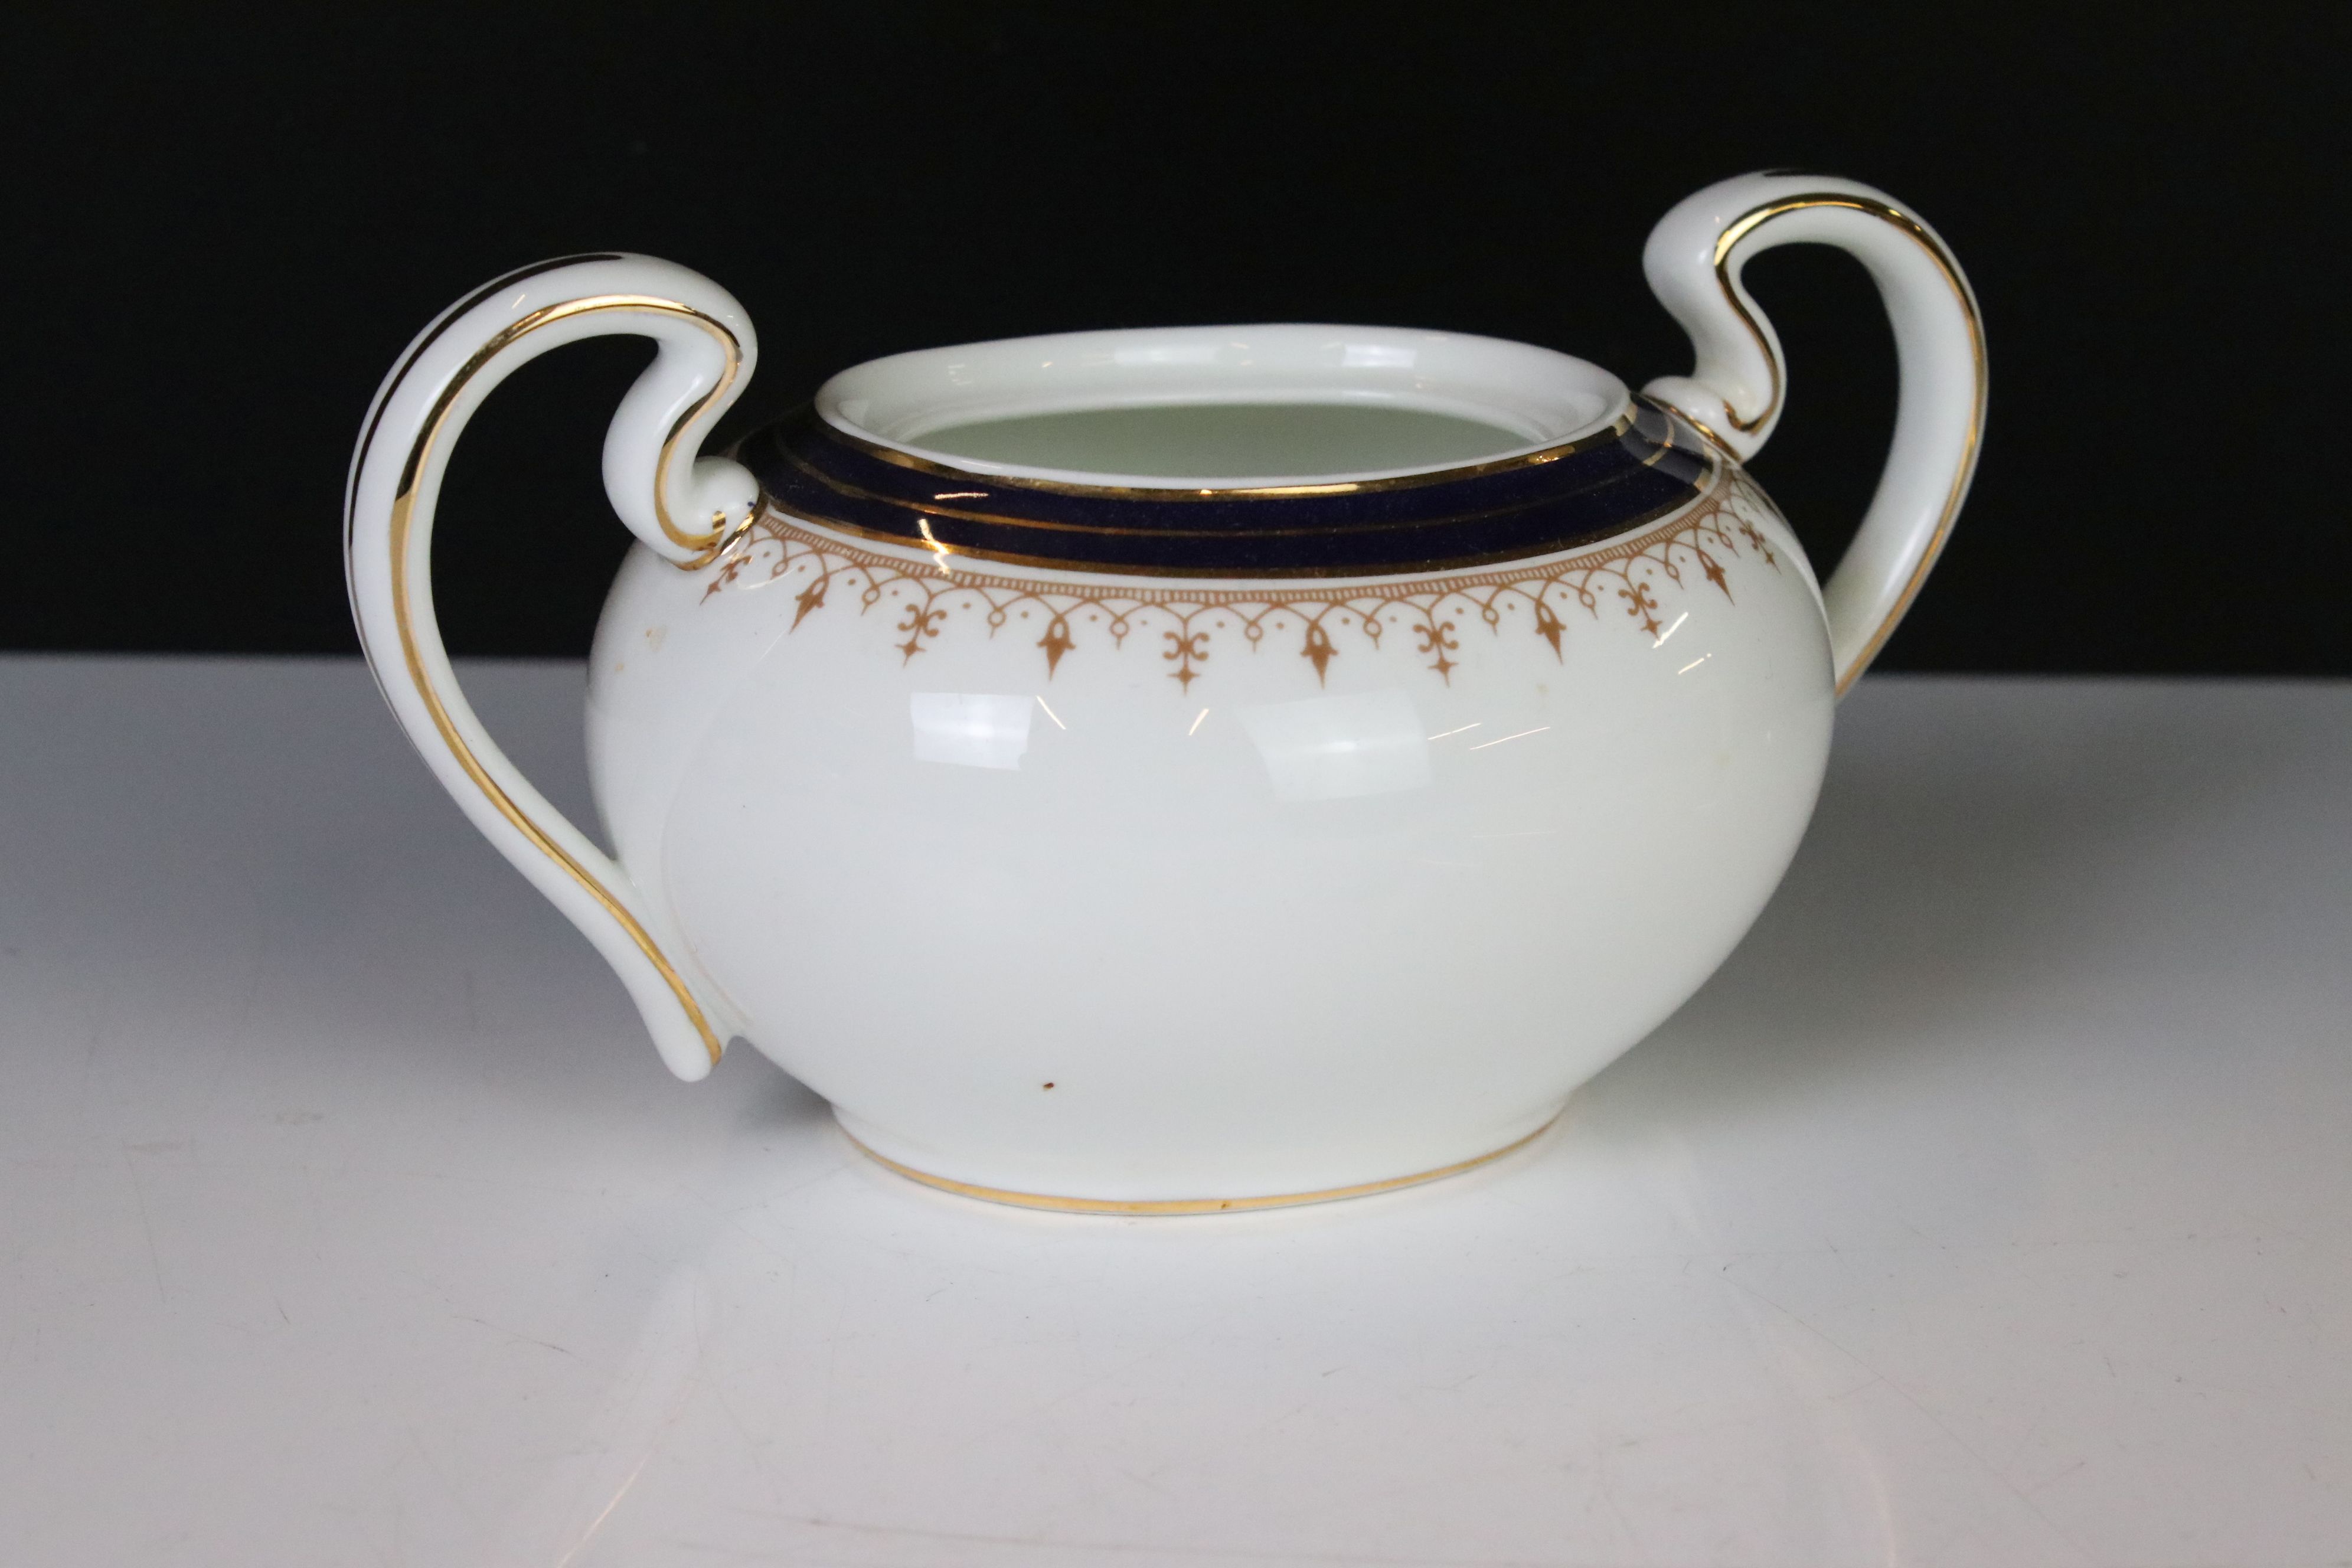 Collection of Aynsley dinner and tea ware in the Leighton pattern including Teapot, 2 soup bowls, - Image 5 of 16